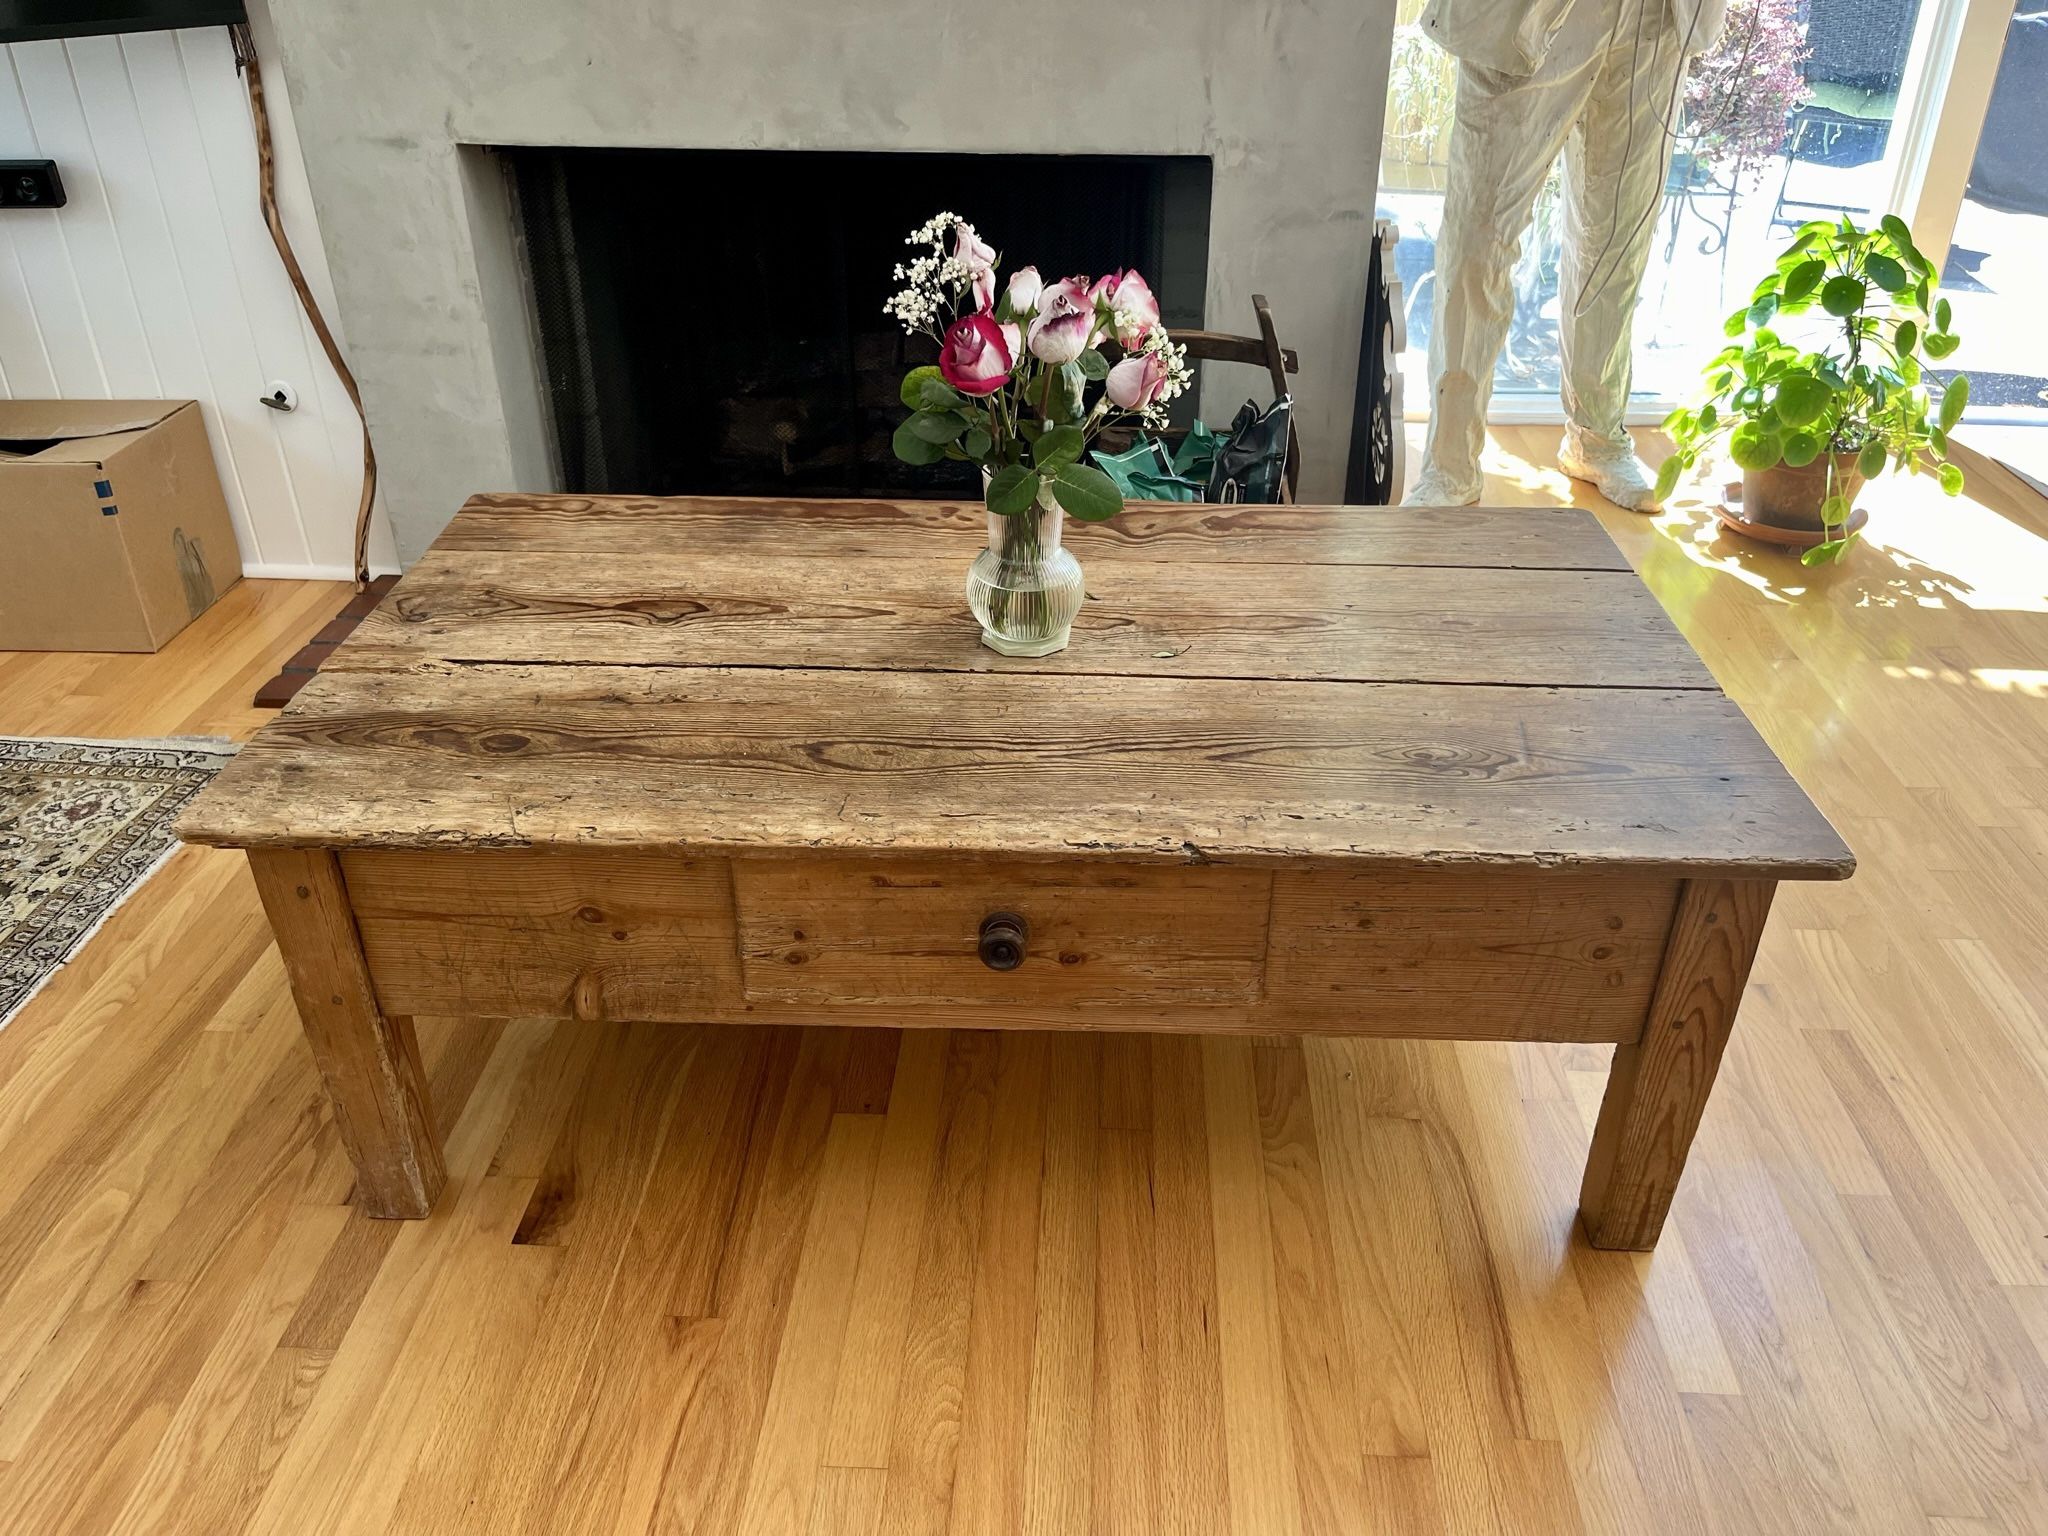 Antique Wooden Coffee Table!